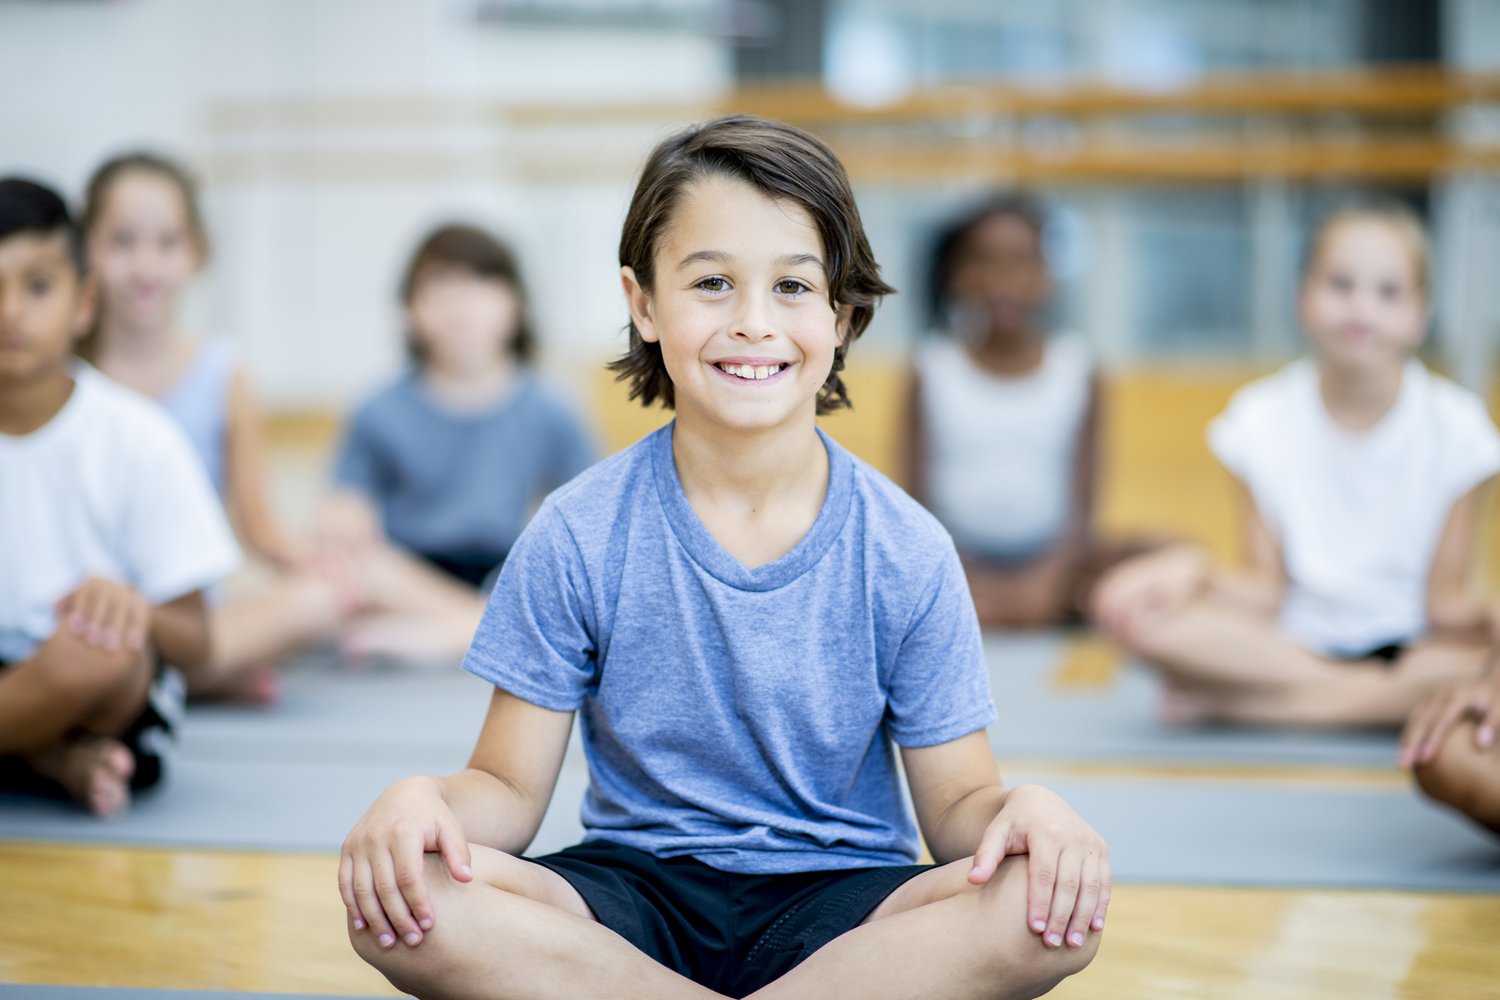 A Children's Guide to Mindfulness: How to Practice It